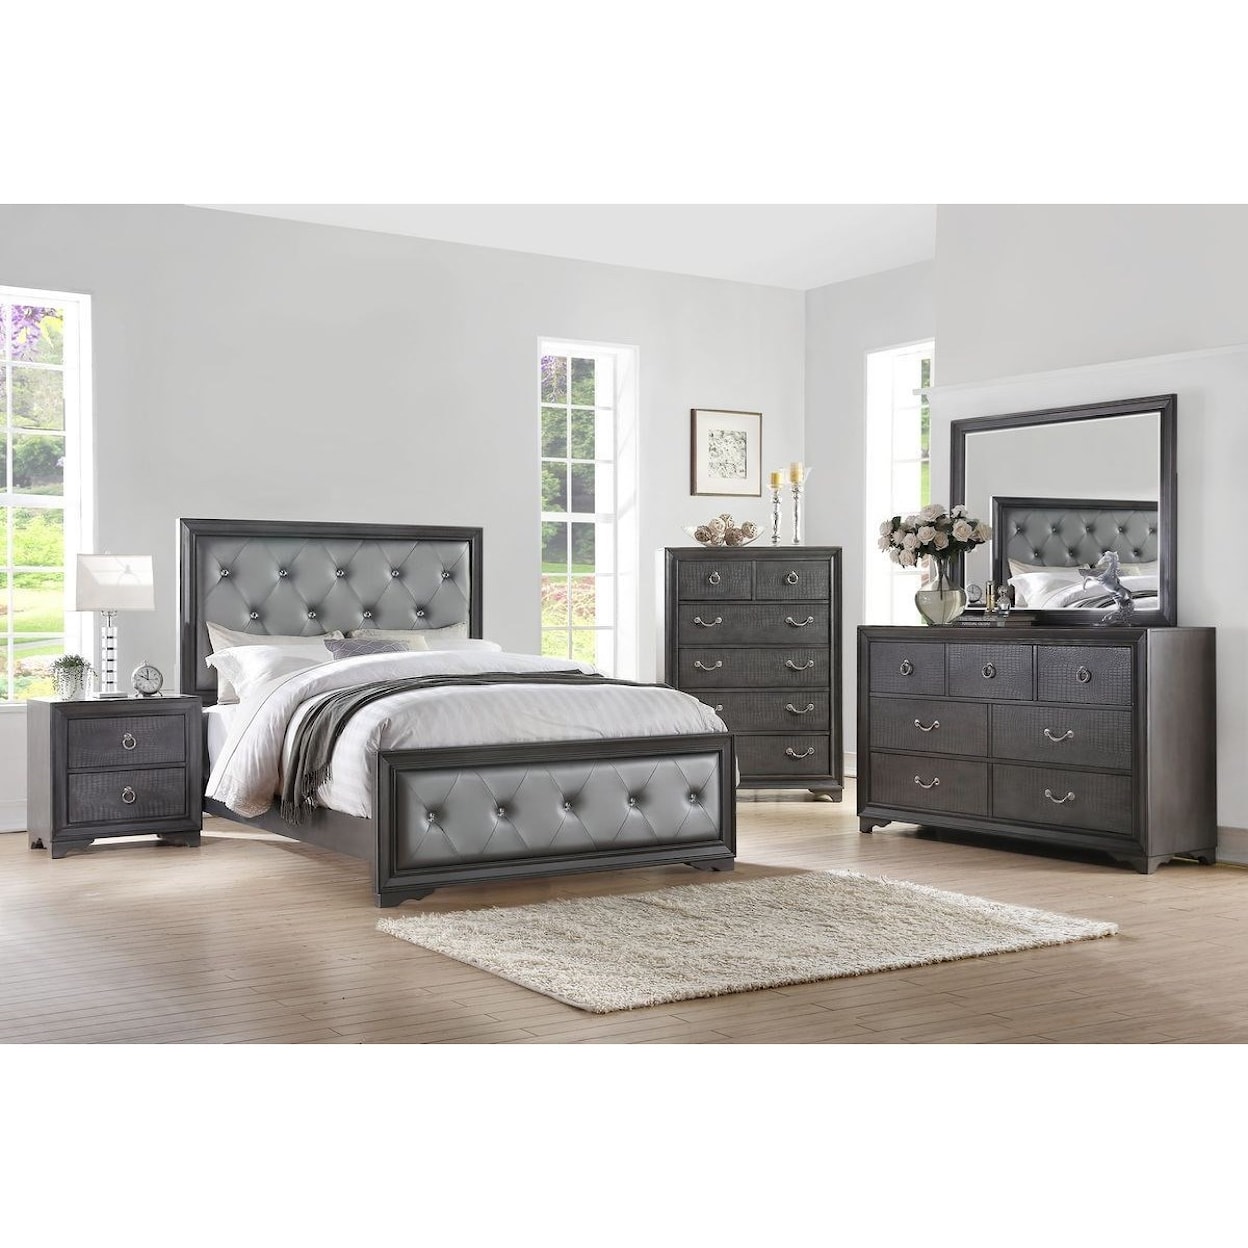 Avalon Furniture Rodeo Drive King Bedroom Group